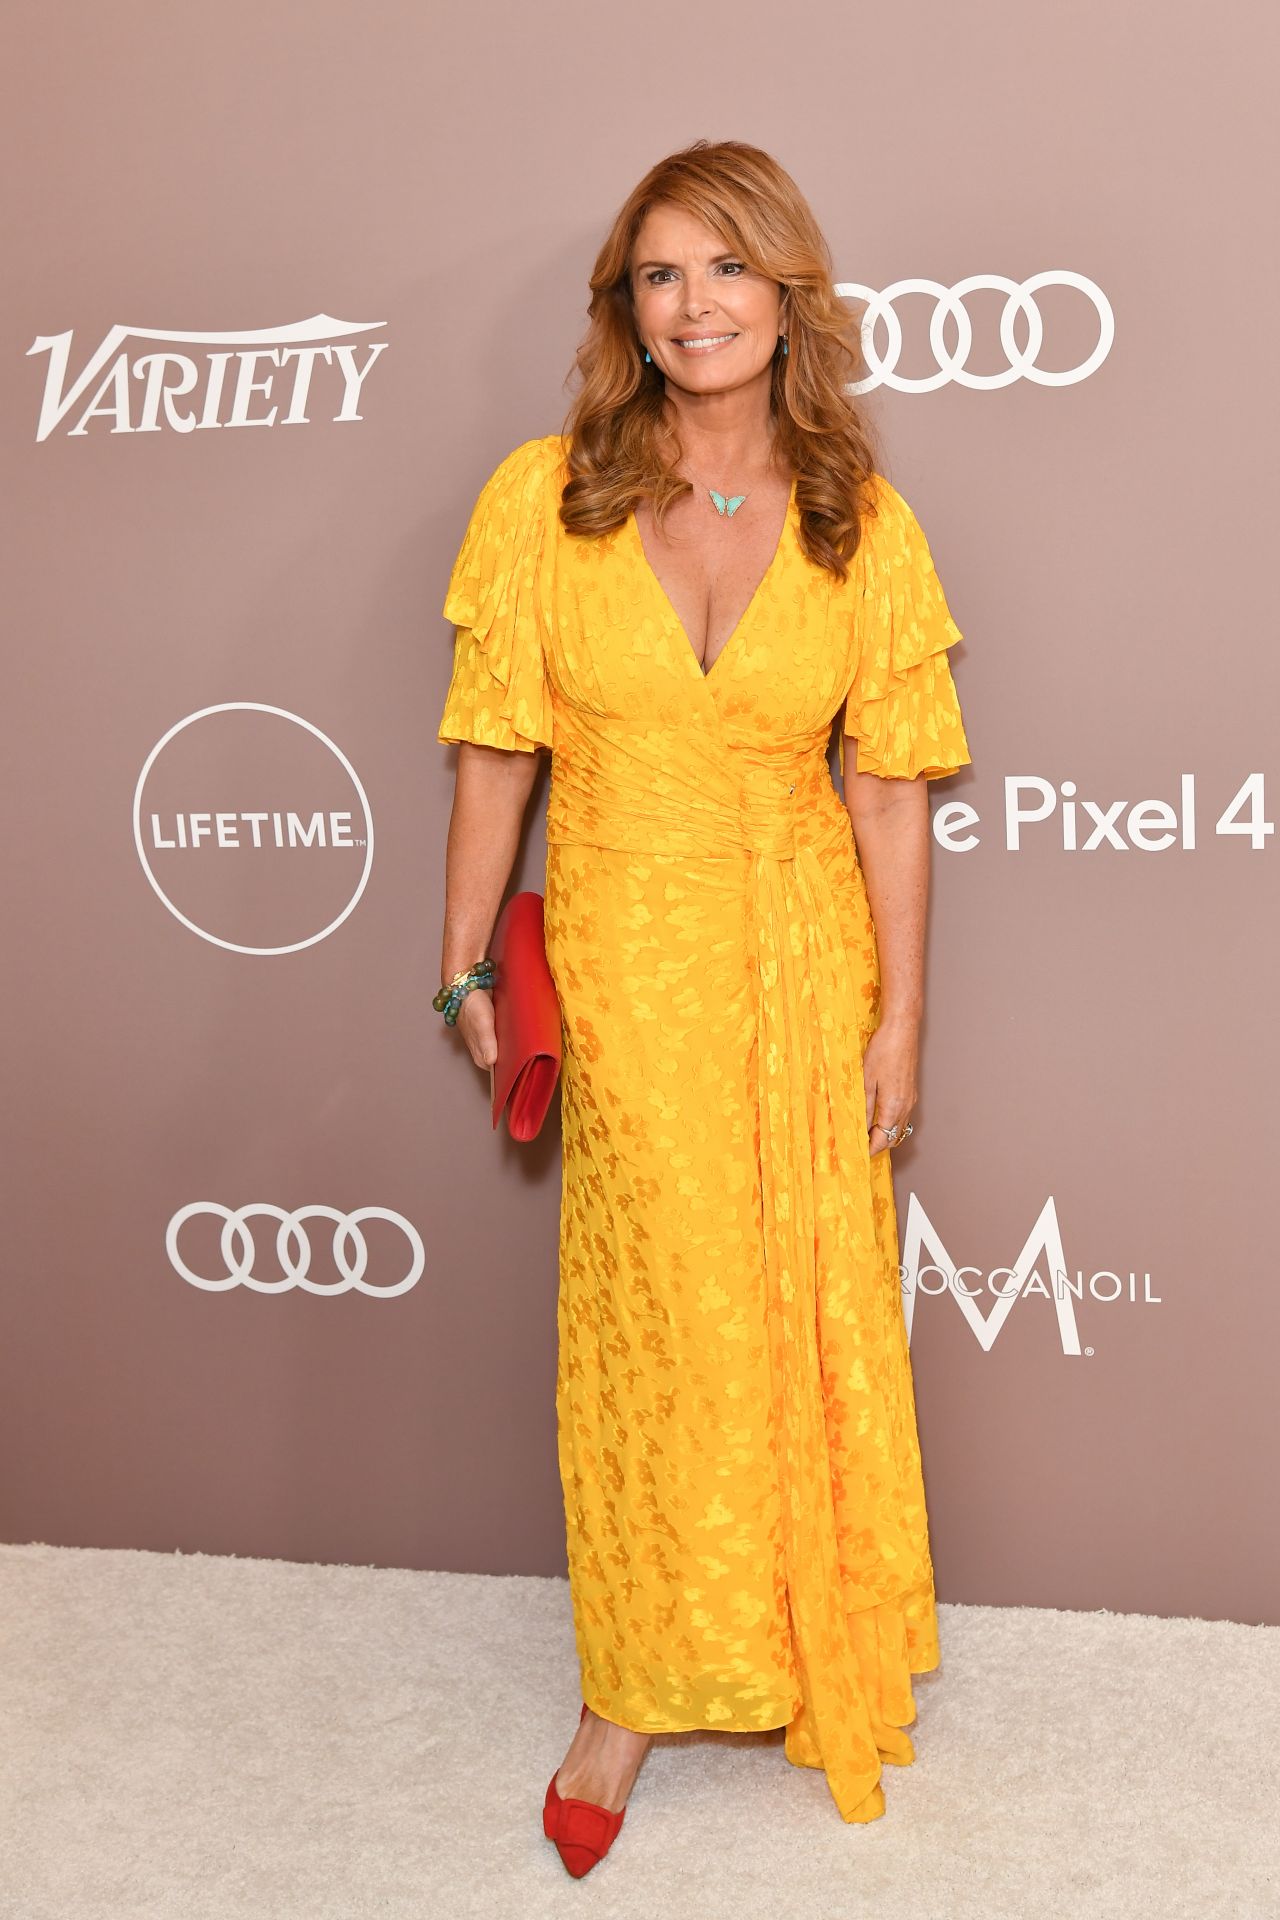 Roma Downey - Variety’s 2019 Power Of Women: Los Angeles.